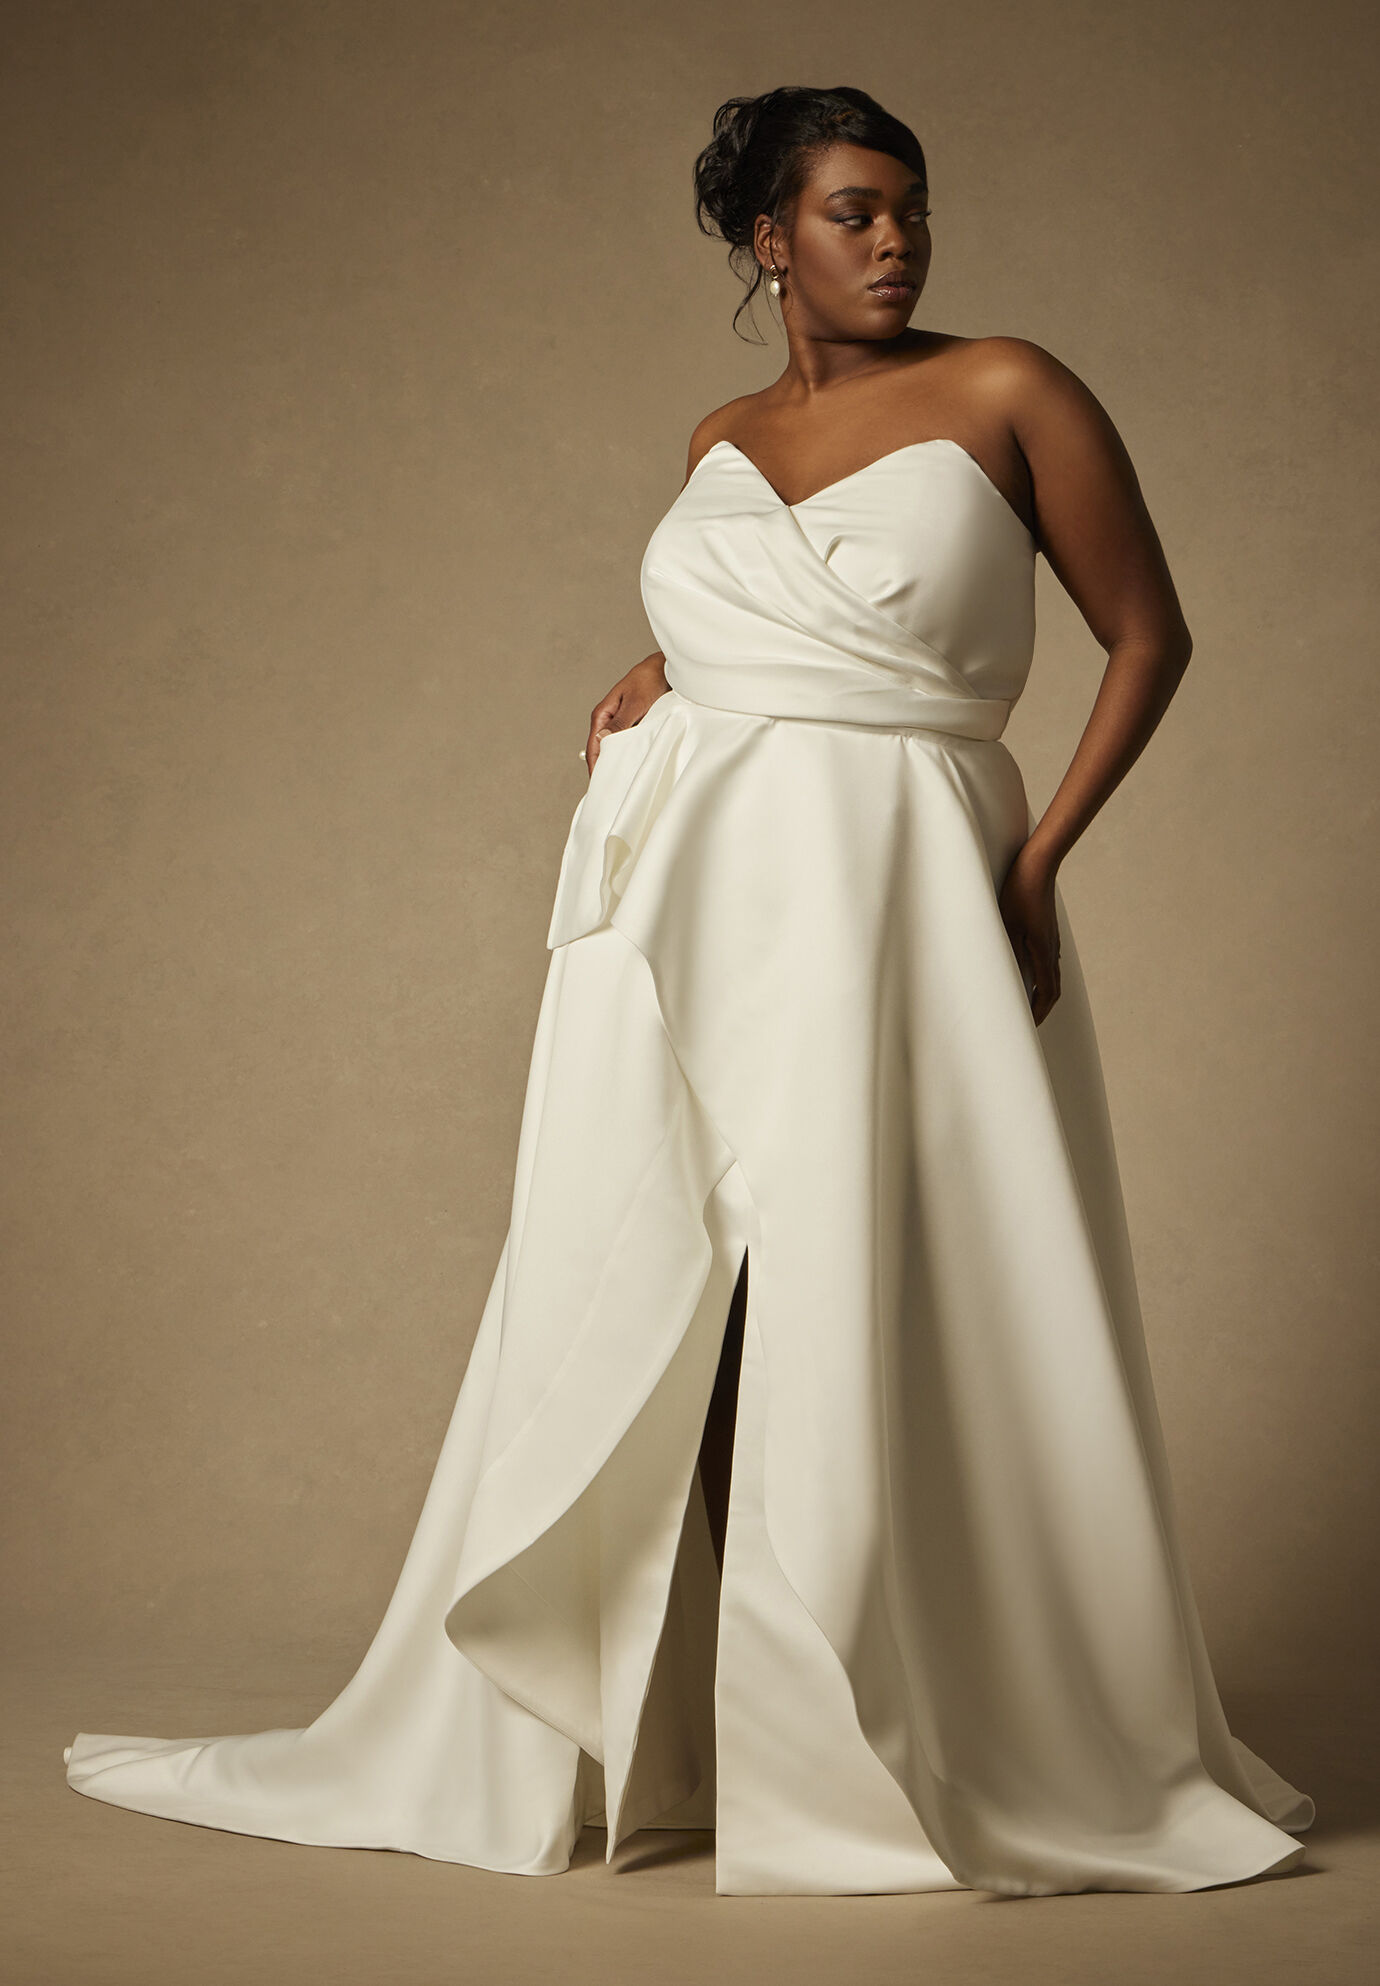 Women Bridal By Sculptural Gown With Removable Skirt ( Size 16 )